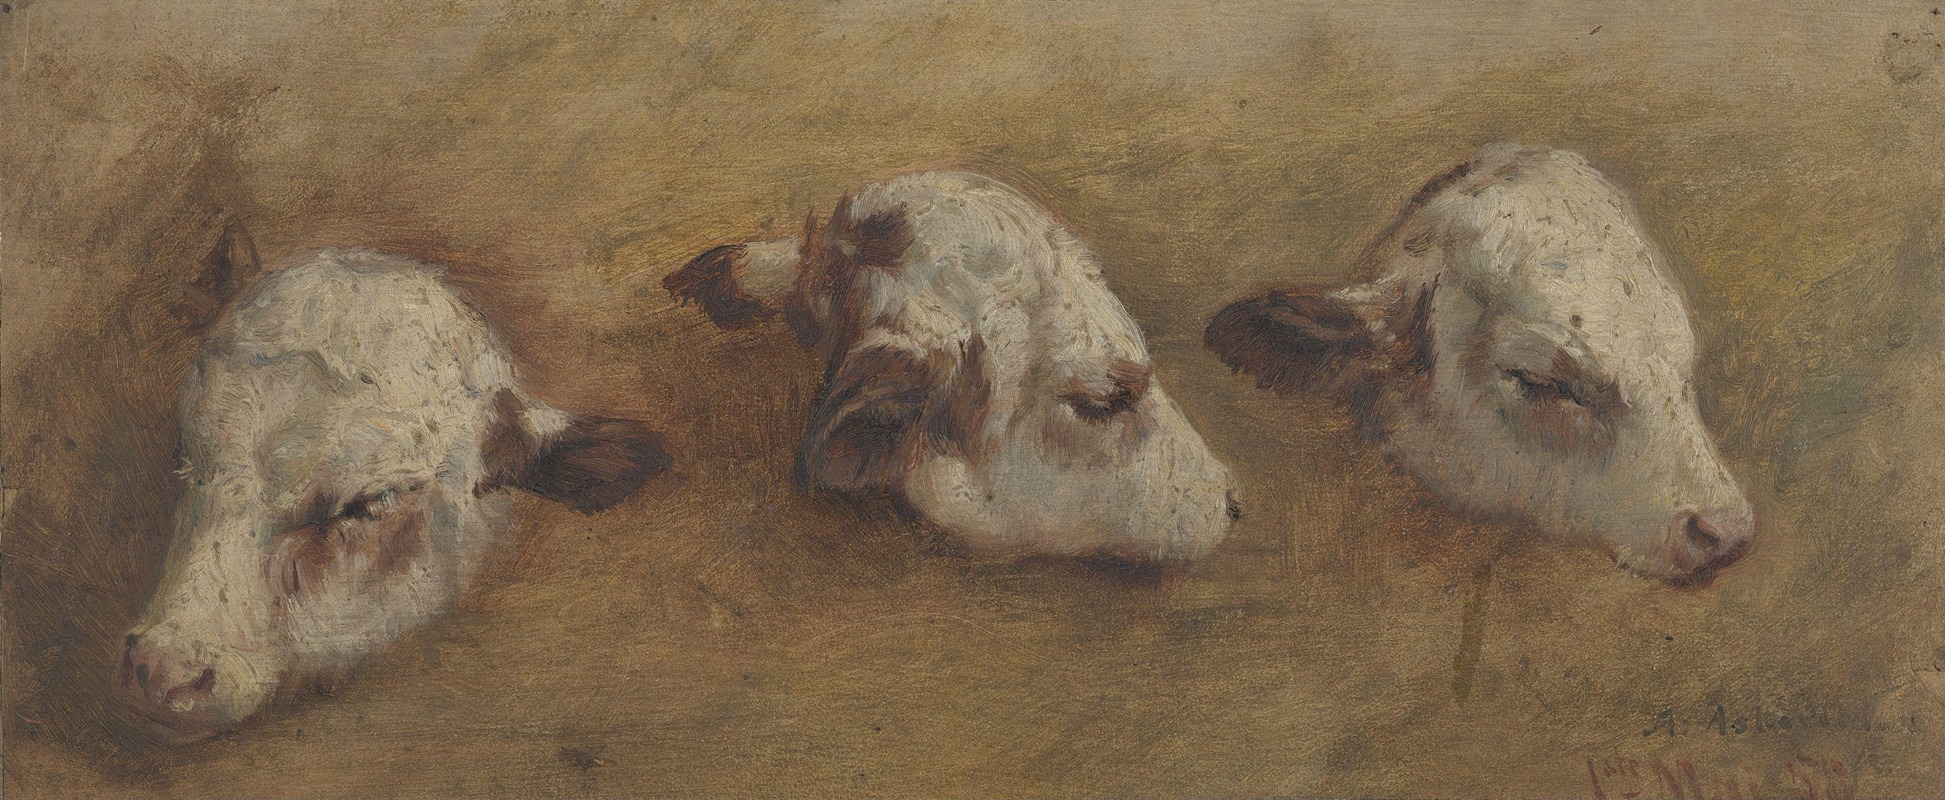 Anders Askevold - Study of Calfheads